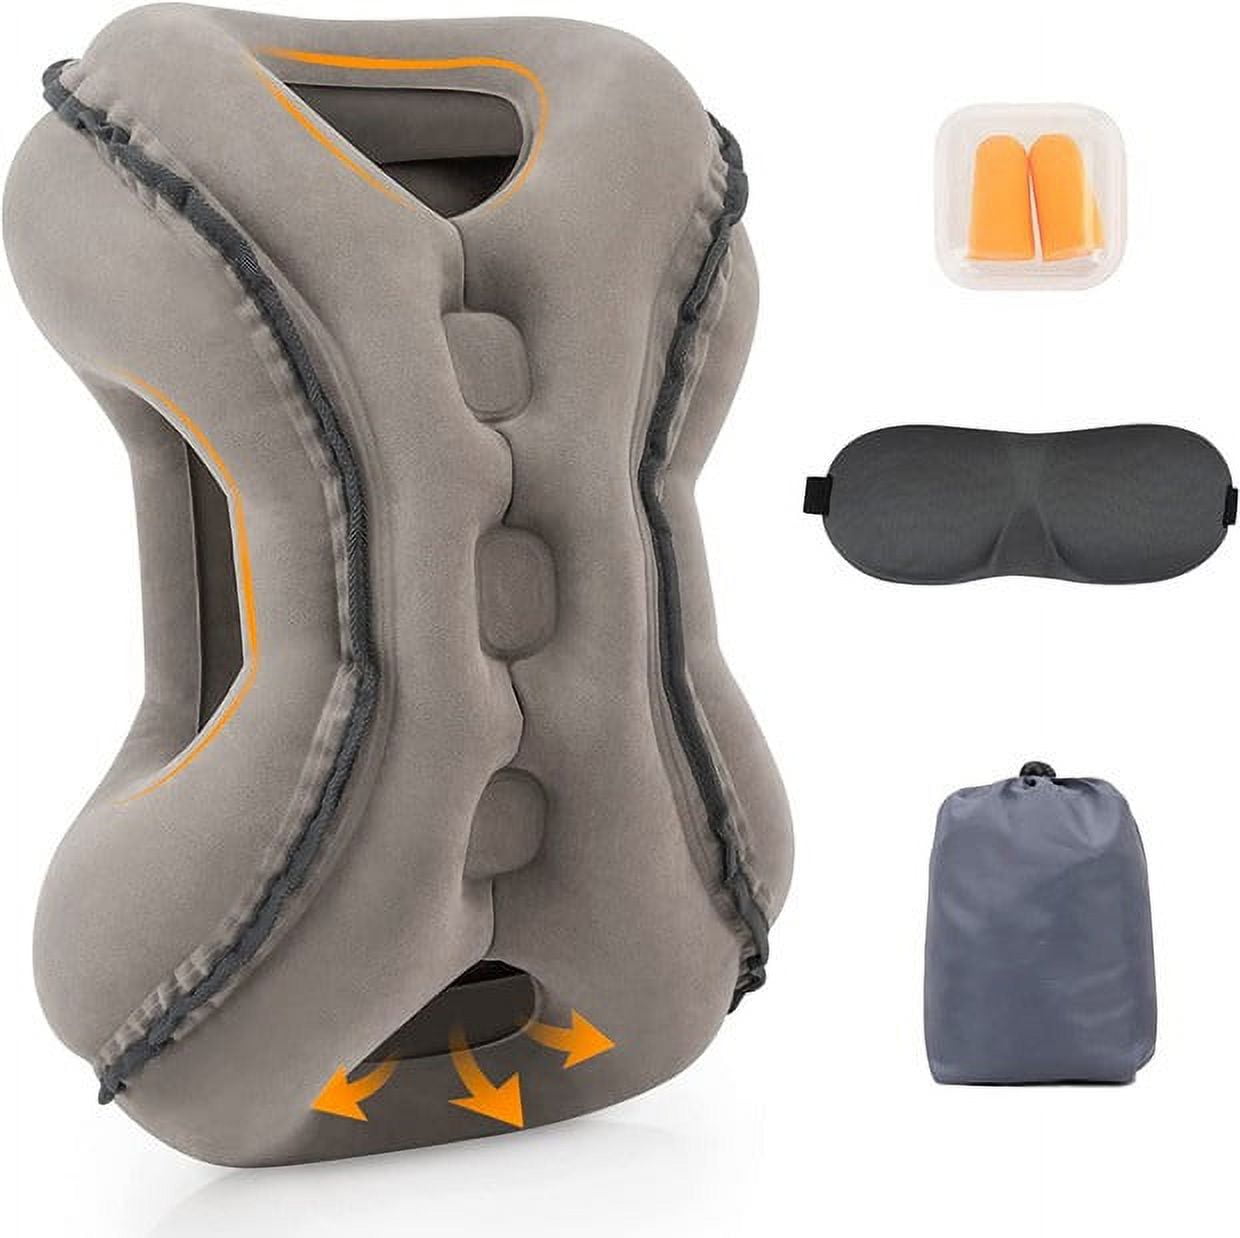 Yirtree Inflatable Travel Pillow for Camping, Home Office Sleeping, Head  Neck Lumbar Support, Ultralight Portable Compact and Soft, Airplane